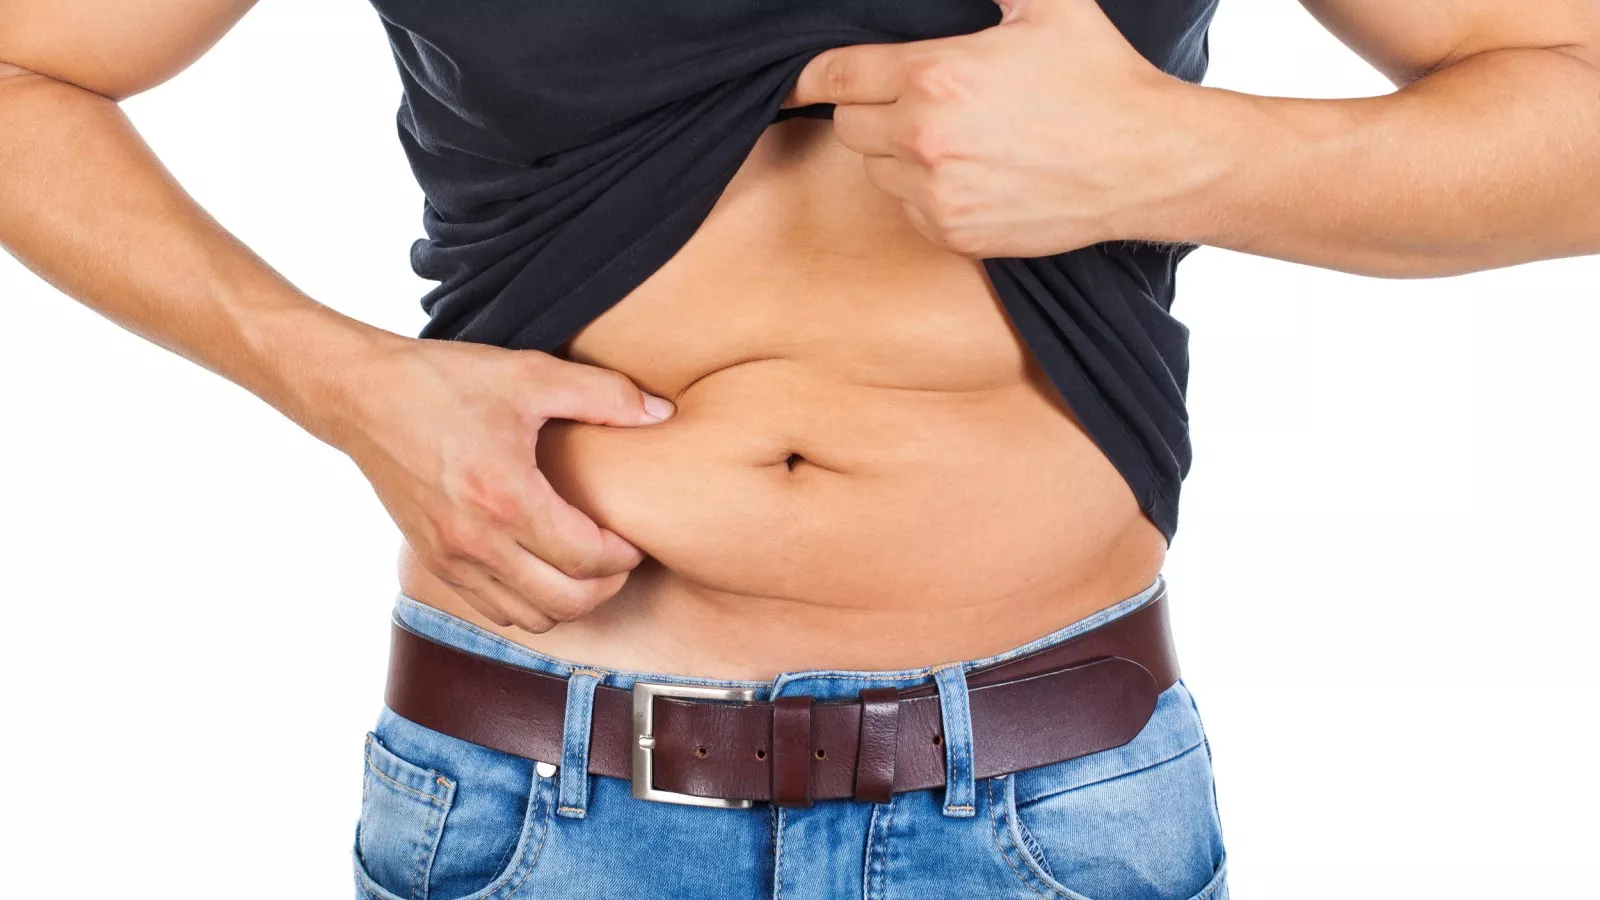 Struggling To Lose Belly Fat? You Could Have These Vitamin Deficiencies